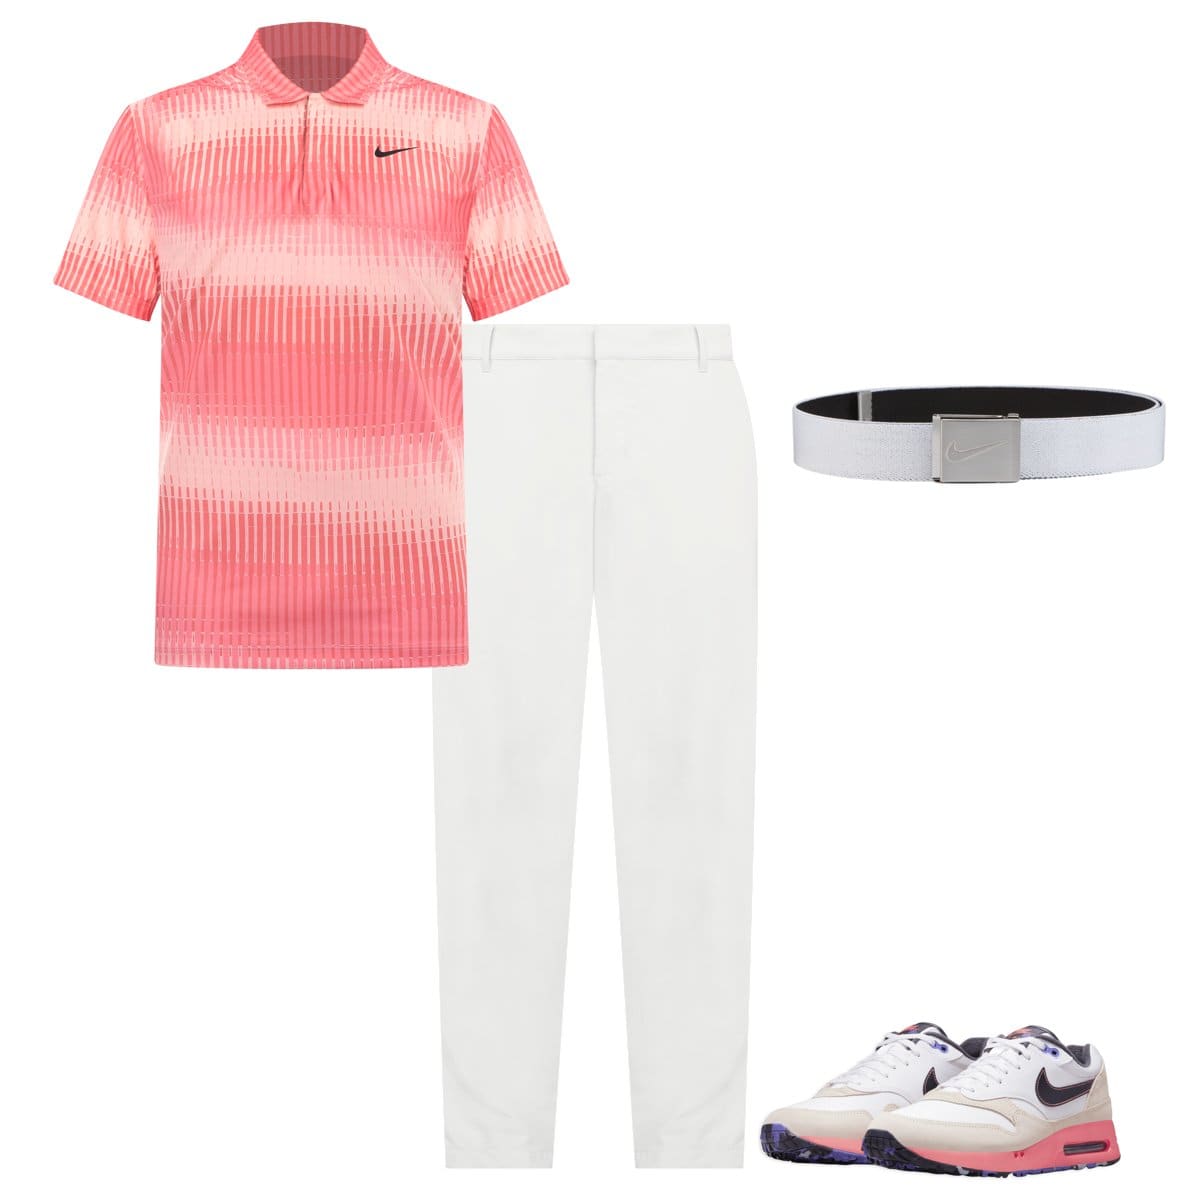 Golf Fashion For Men And Women: What To Wear On The Course